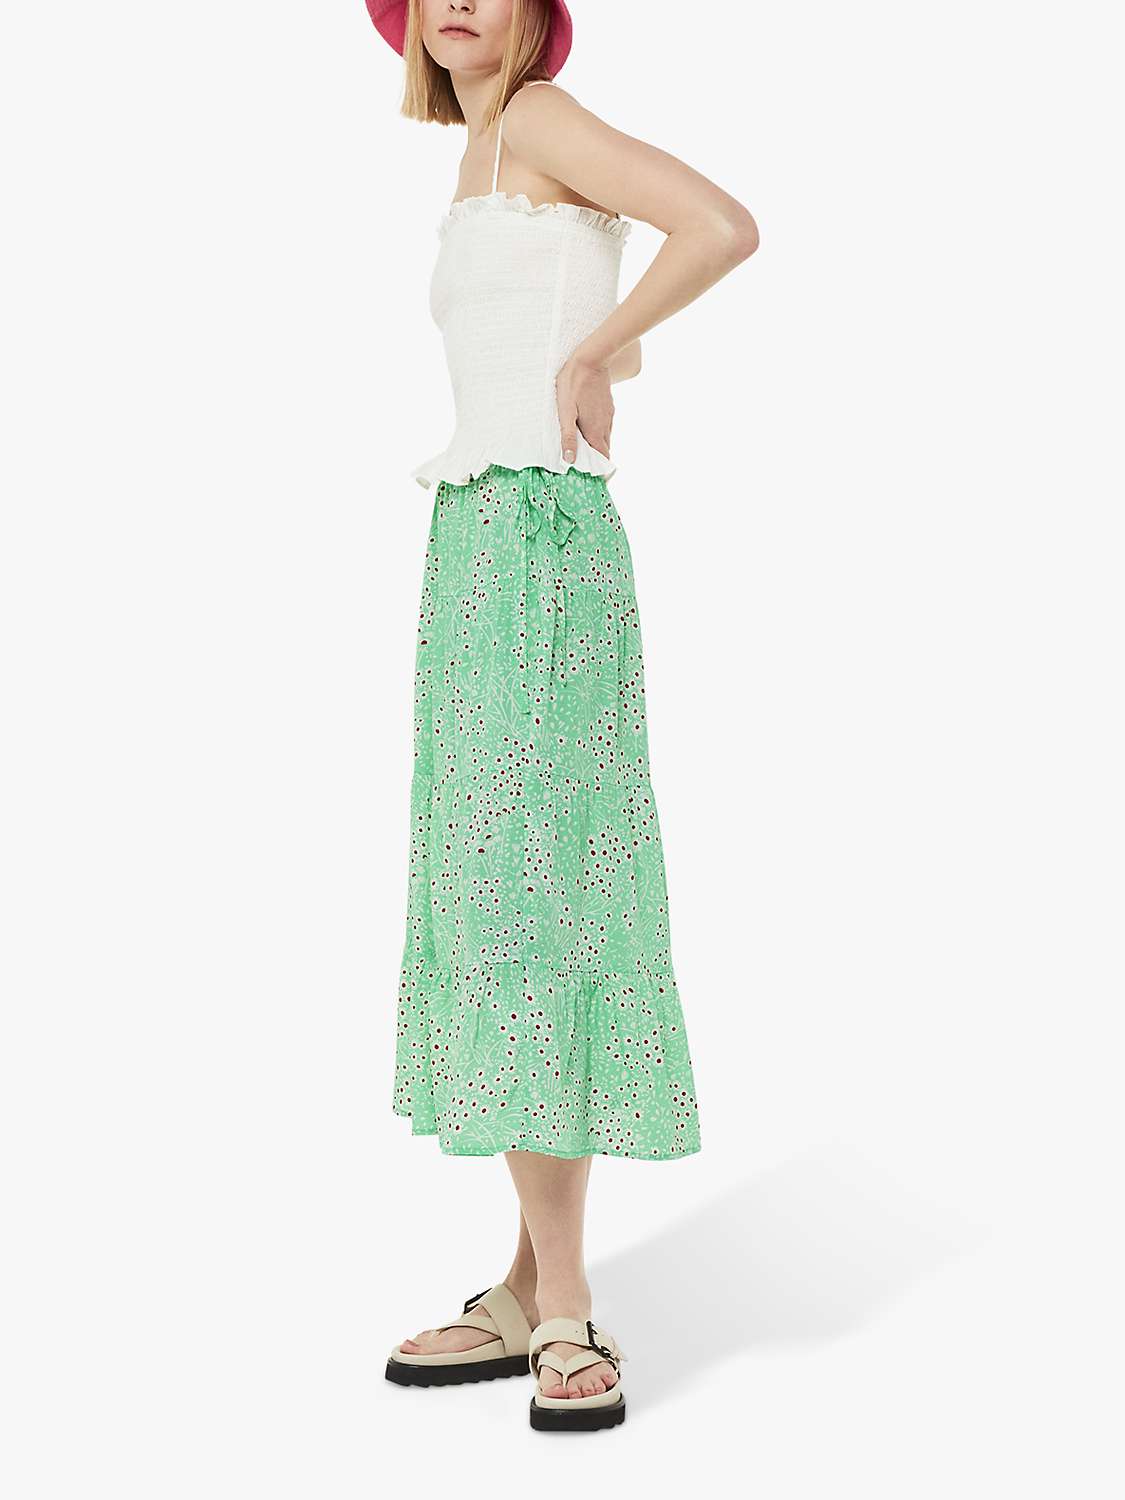 Buy Whistles Daisy Meadow Tie Side Tiered Skirt, Green Online at johnlewis.com